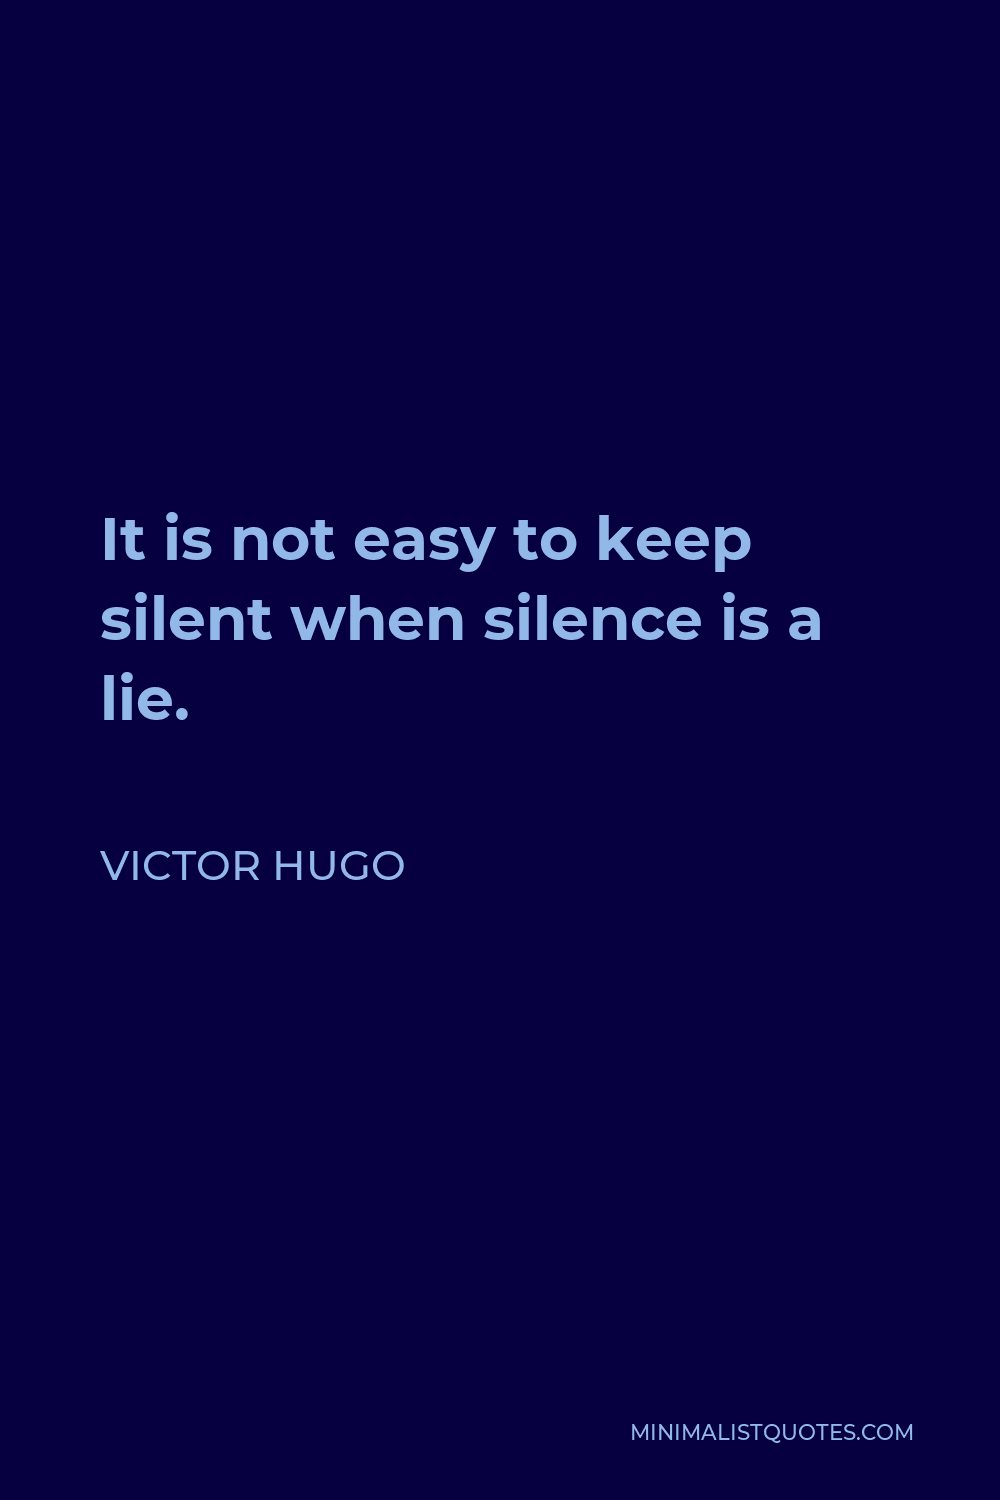 Victor Hugo Quote - It is not easy to keep silent when silence is a lie.